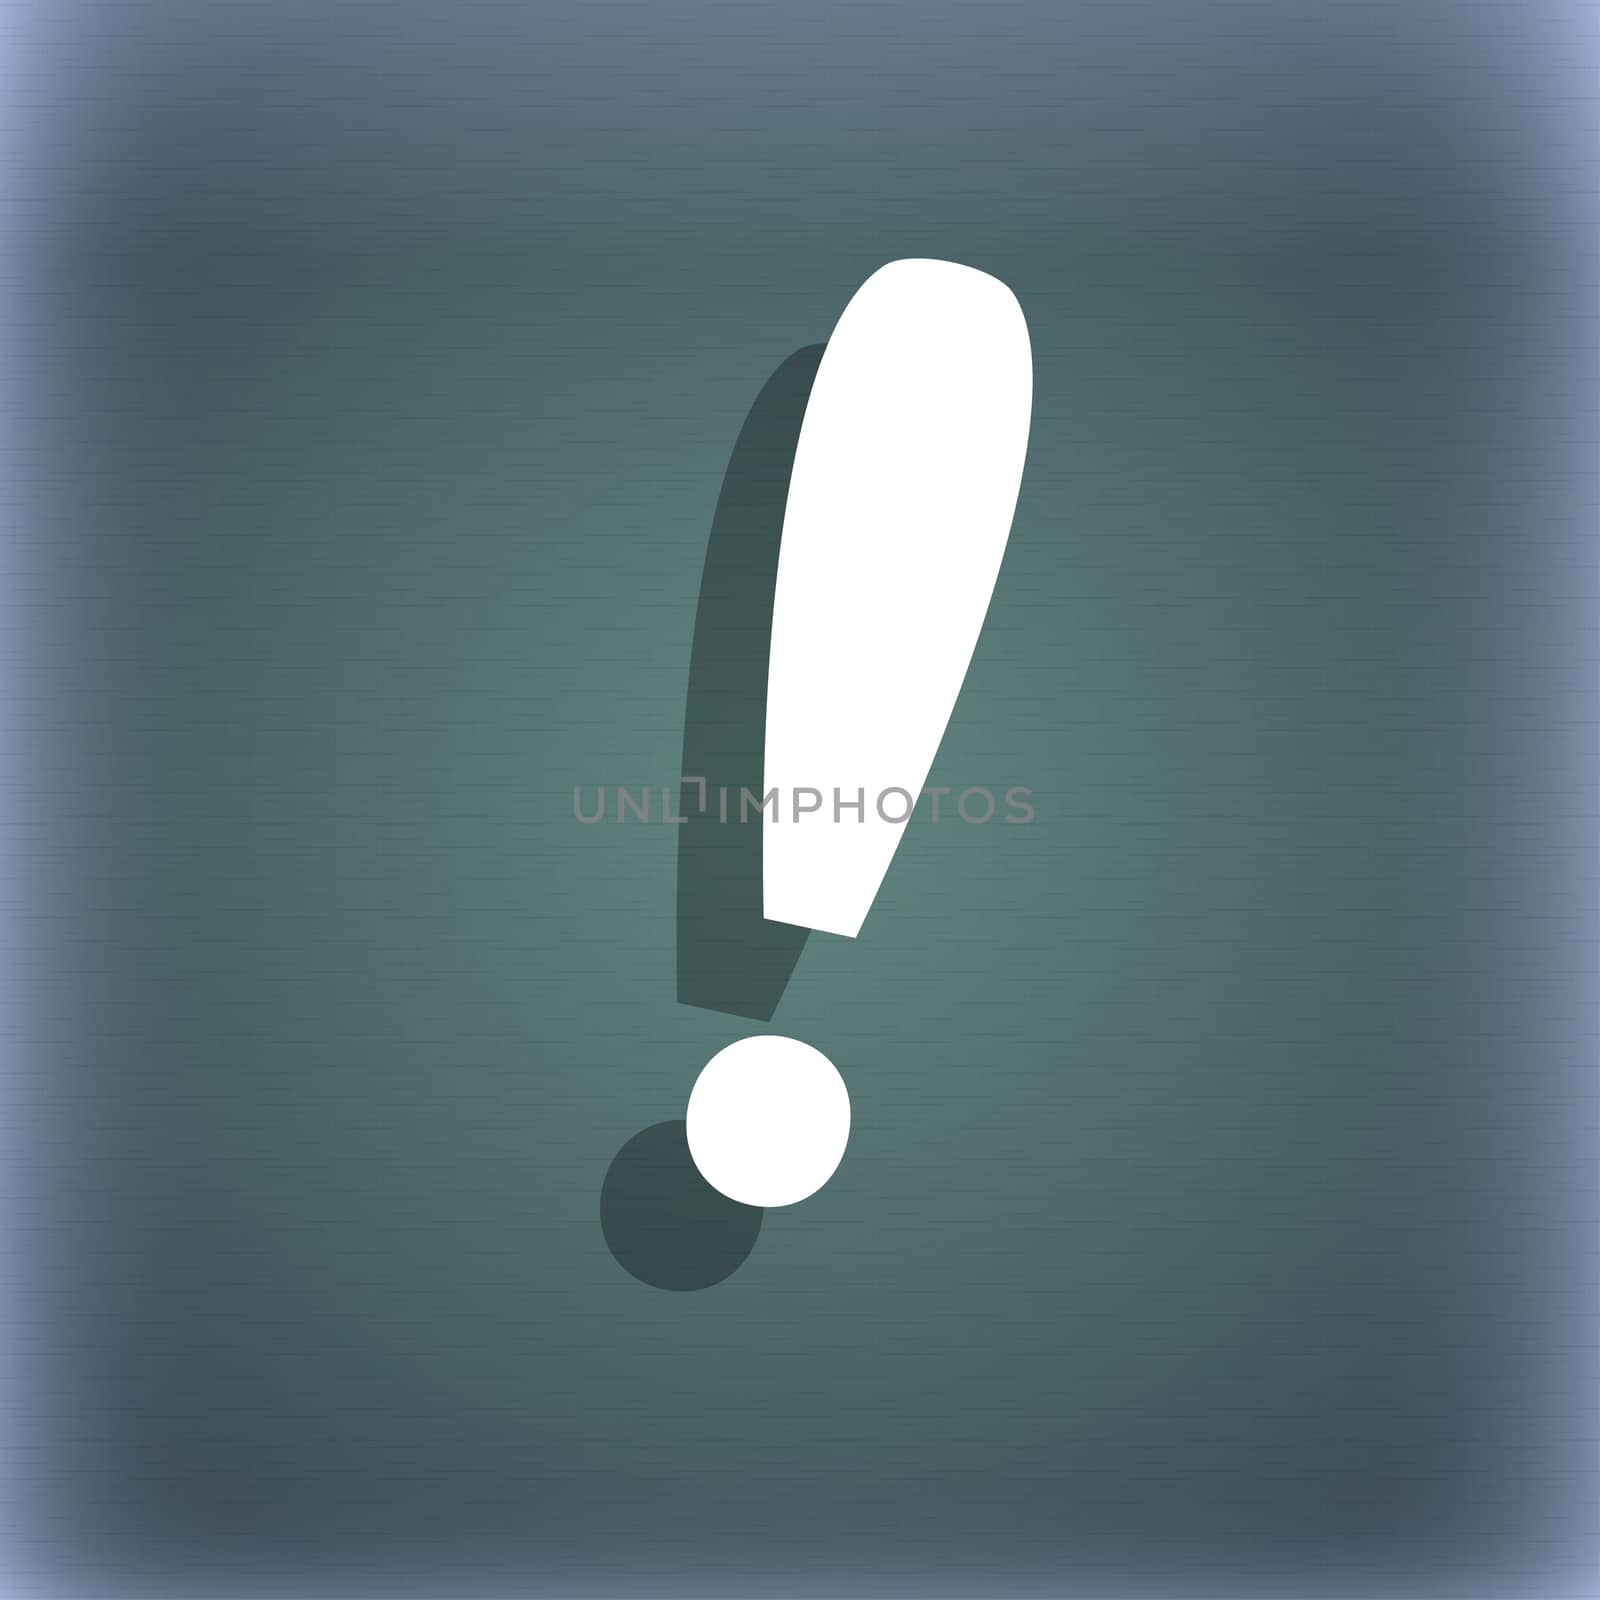 Exclamation mark sign icon. Attention speech bubble symbol. On the blue-green abstract background with shadow and space for your text. illustration